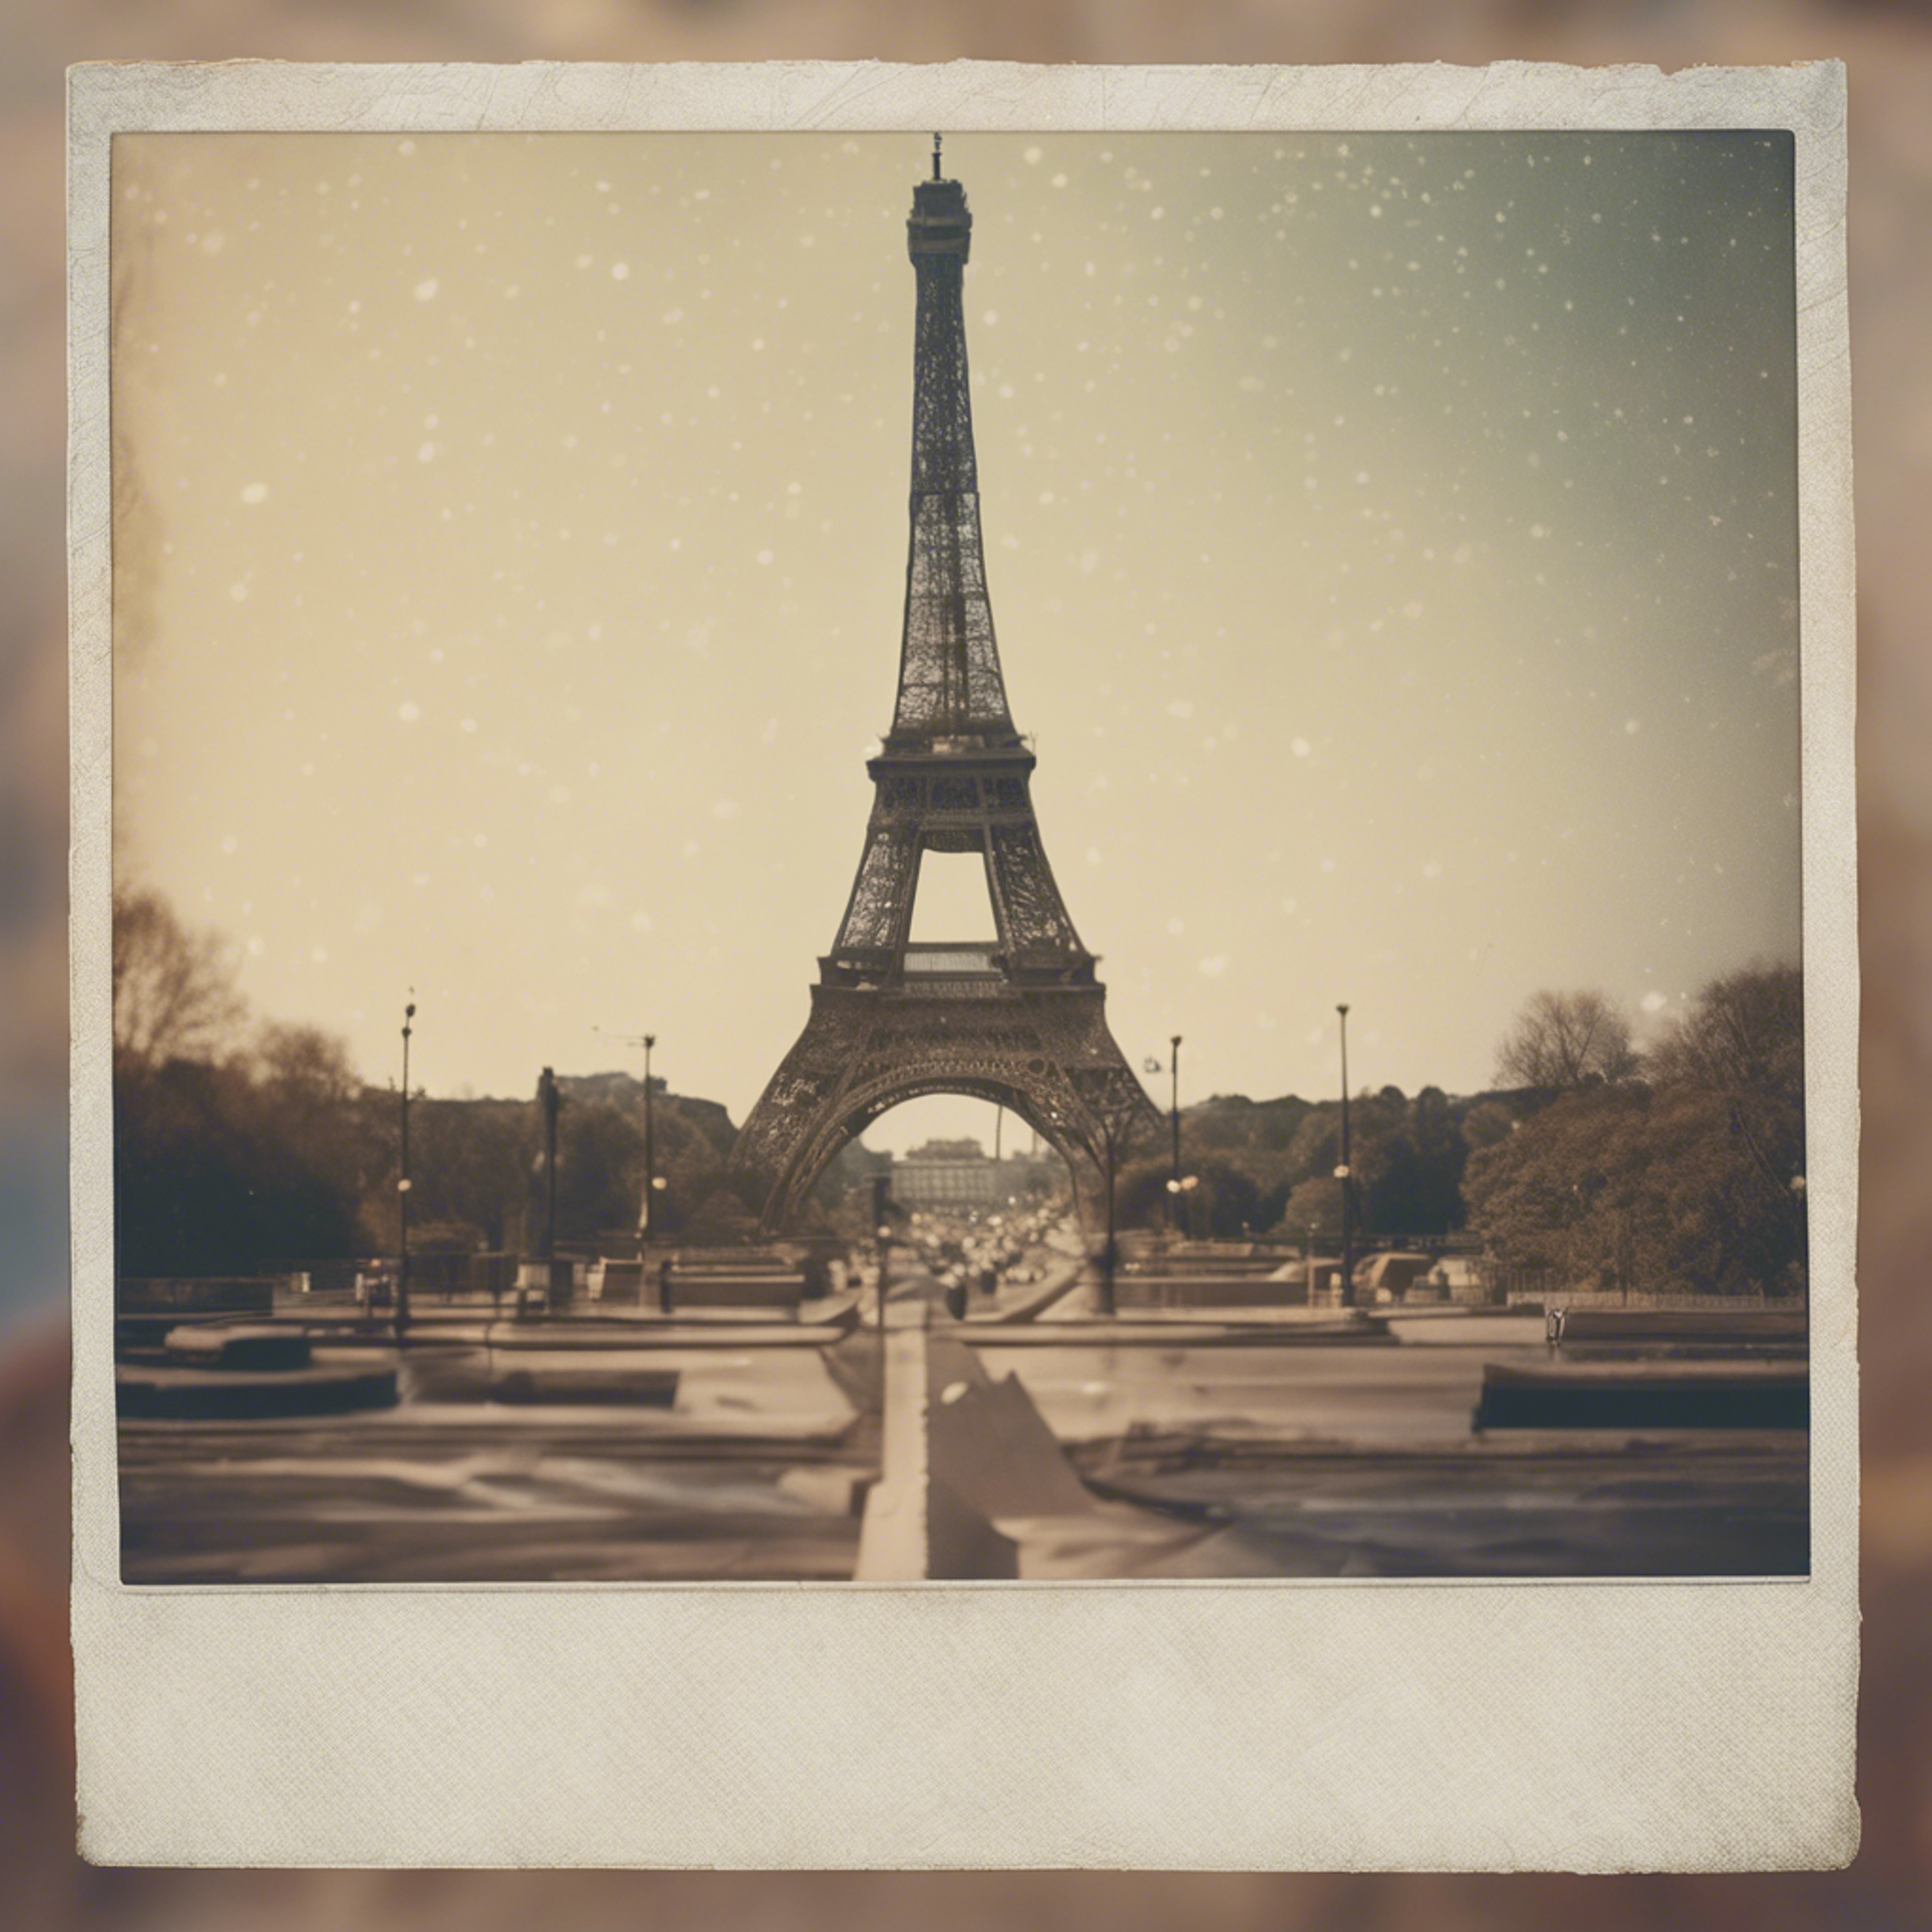 A faded beige Polaroid picture of an iconic landmark from the 70s. Tapet[3ceb93f71d2c49b28cf4]